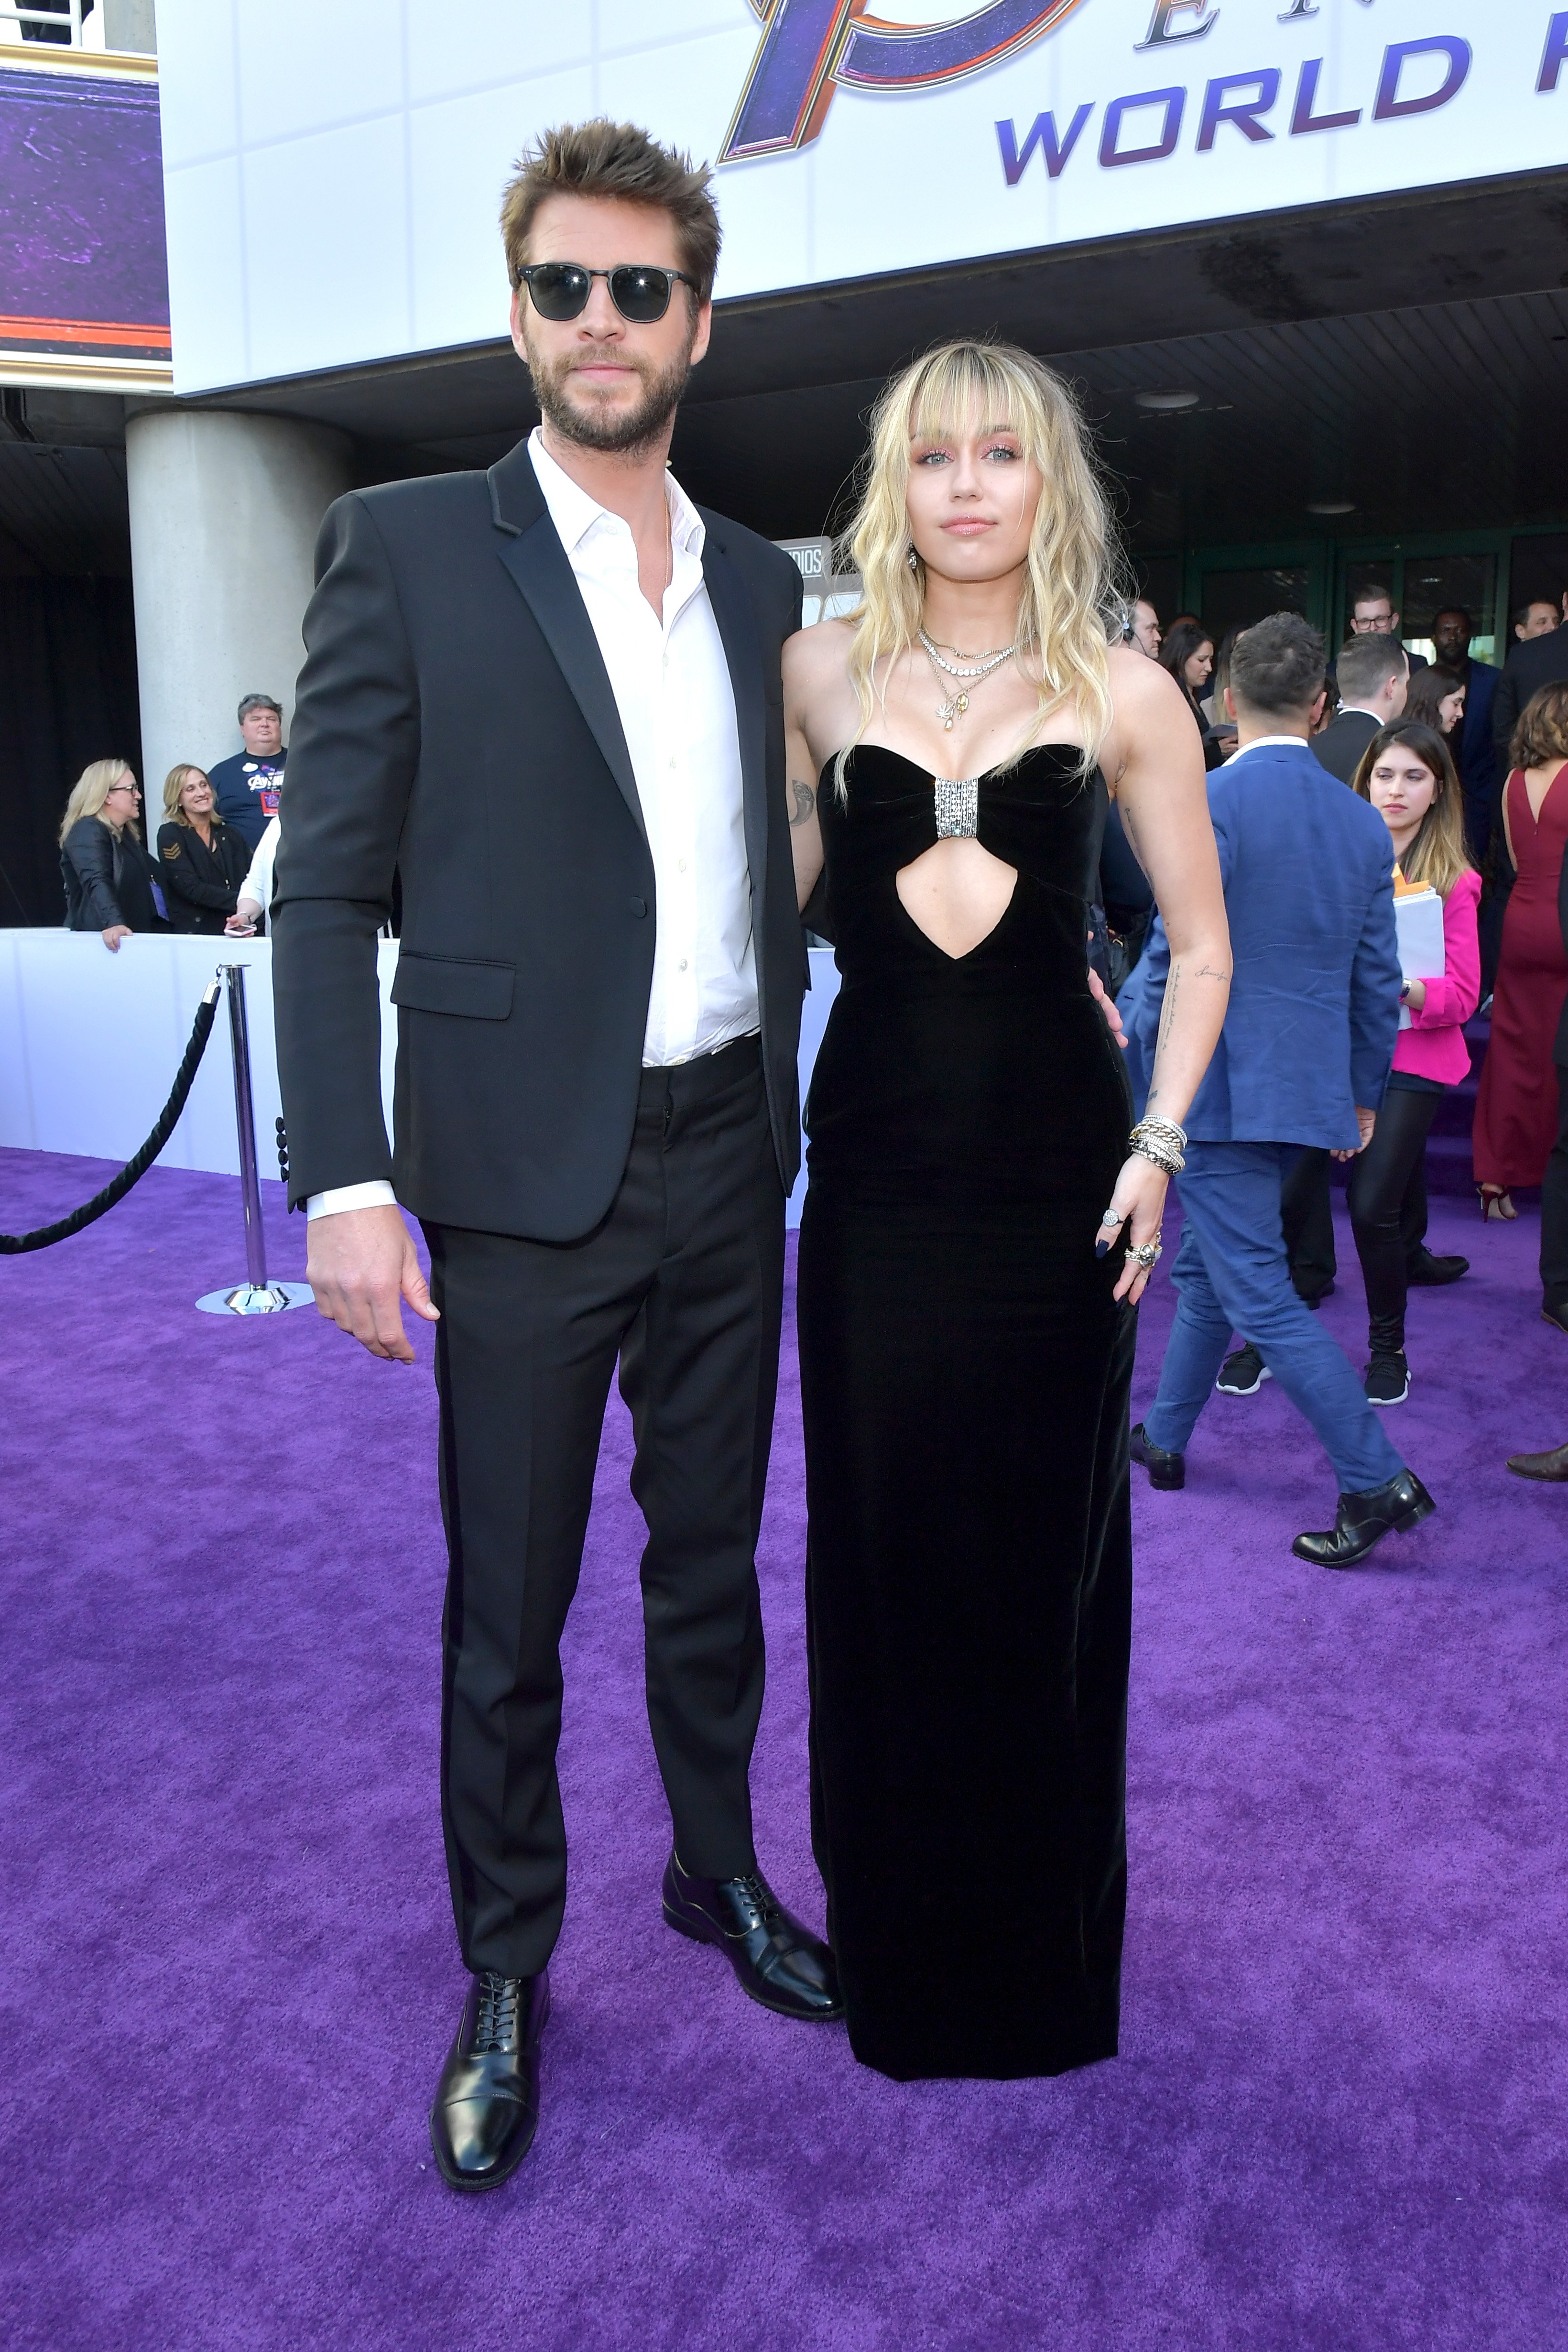 Liam Hemsworth and Miley Cyrus at the world premiere of Walt Disney Studios Motion Pictures 'Avengers Endgame' at the Los Angeles Convention Center on April 22, 2019 in California | Photo: Getty Images